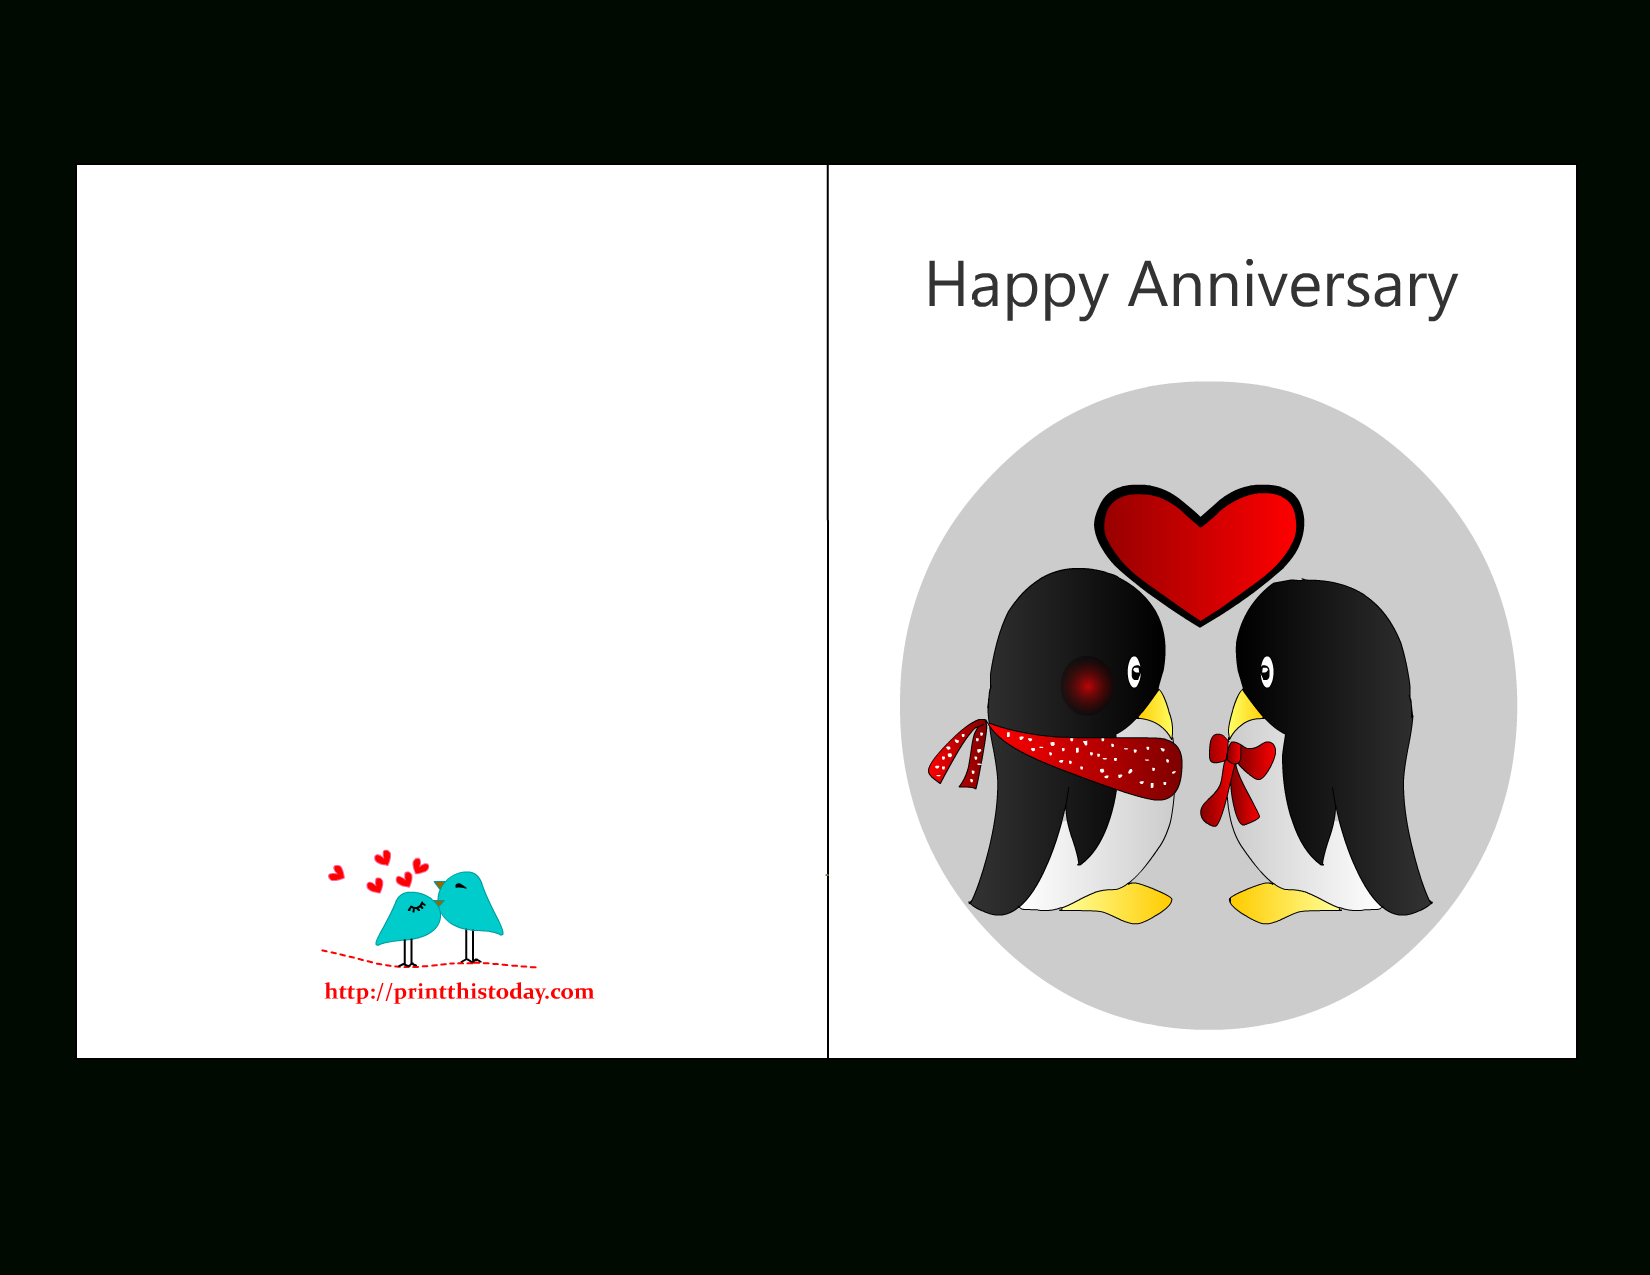 Free Printable Anniversary Cards For Him - Printable Cards - Printable Cards Free Anniversary